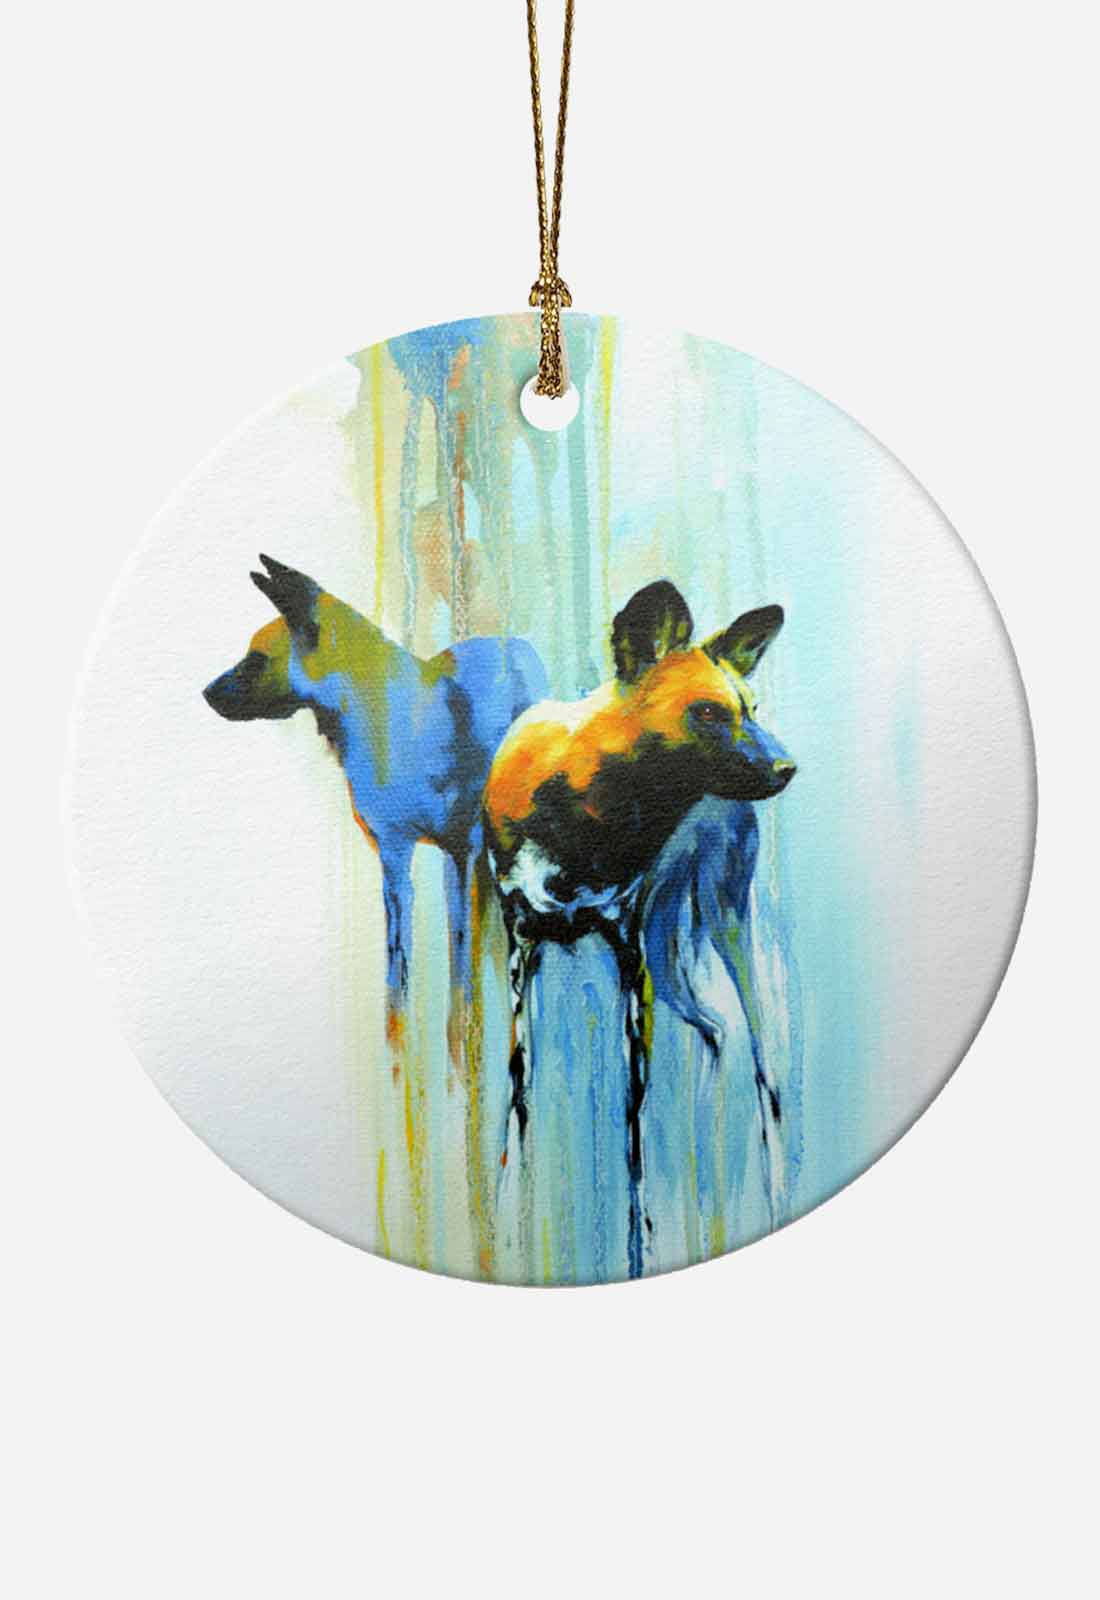 Main image for Painted Dogs Ceramic Bauble